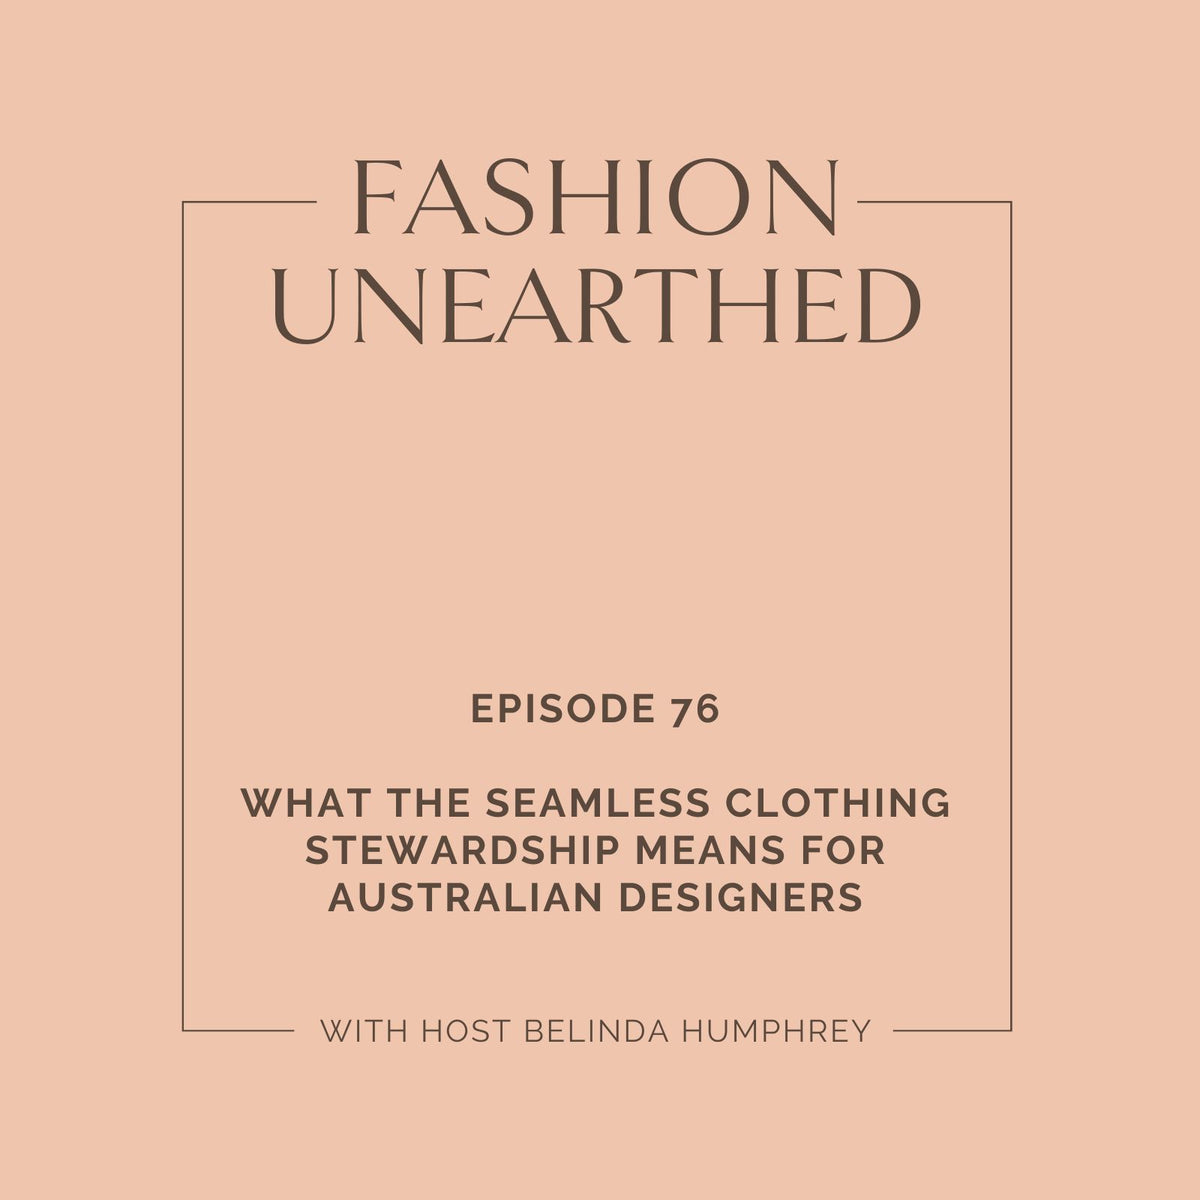 Episode 76: What the Seamless Clothing Stewardship means for Australian designers